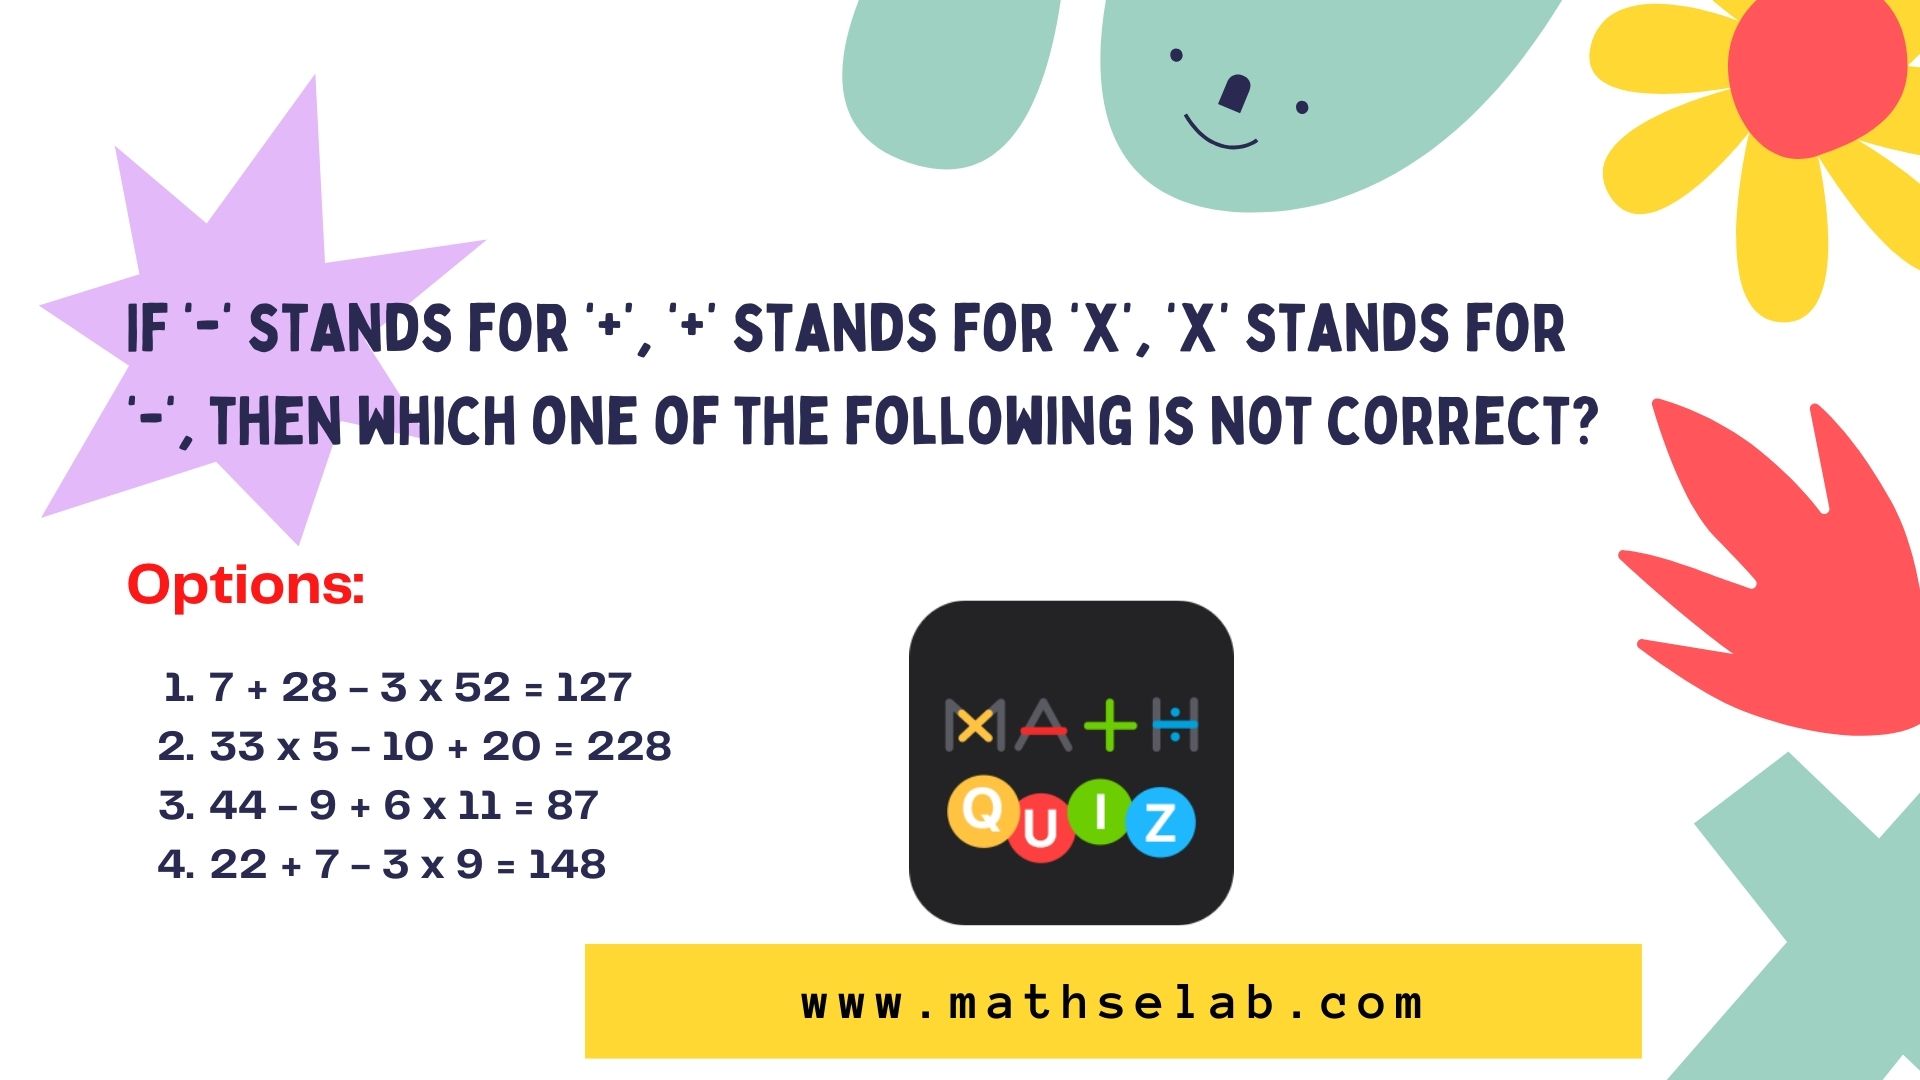 If '-' stands for '+', '+' stands for 'x', 'x' stands for '-', then which one of the following is not correct?